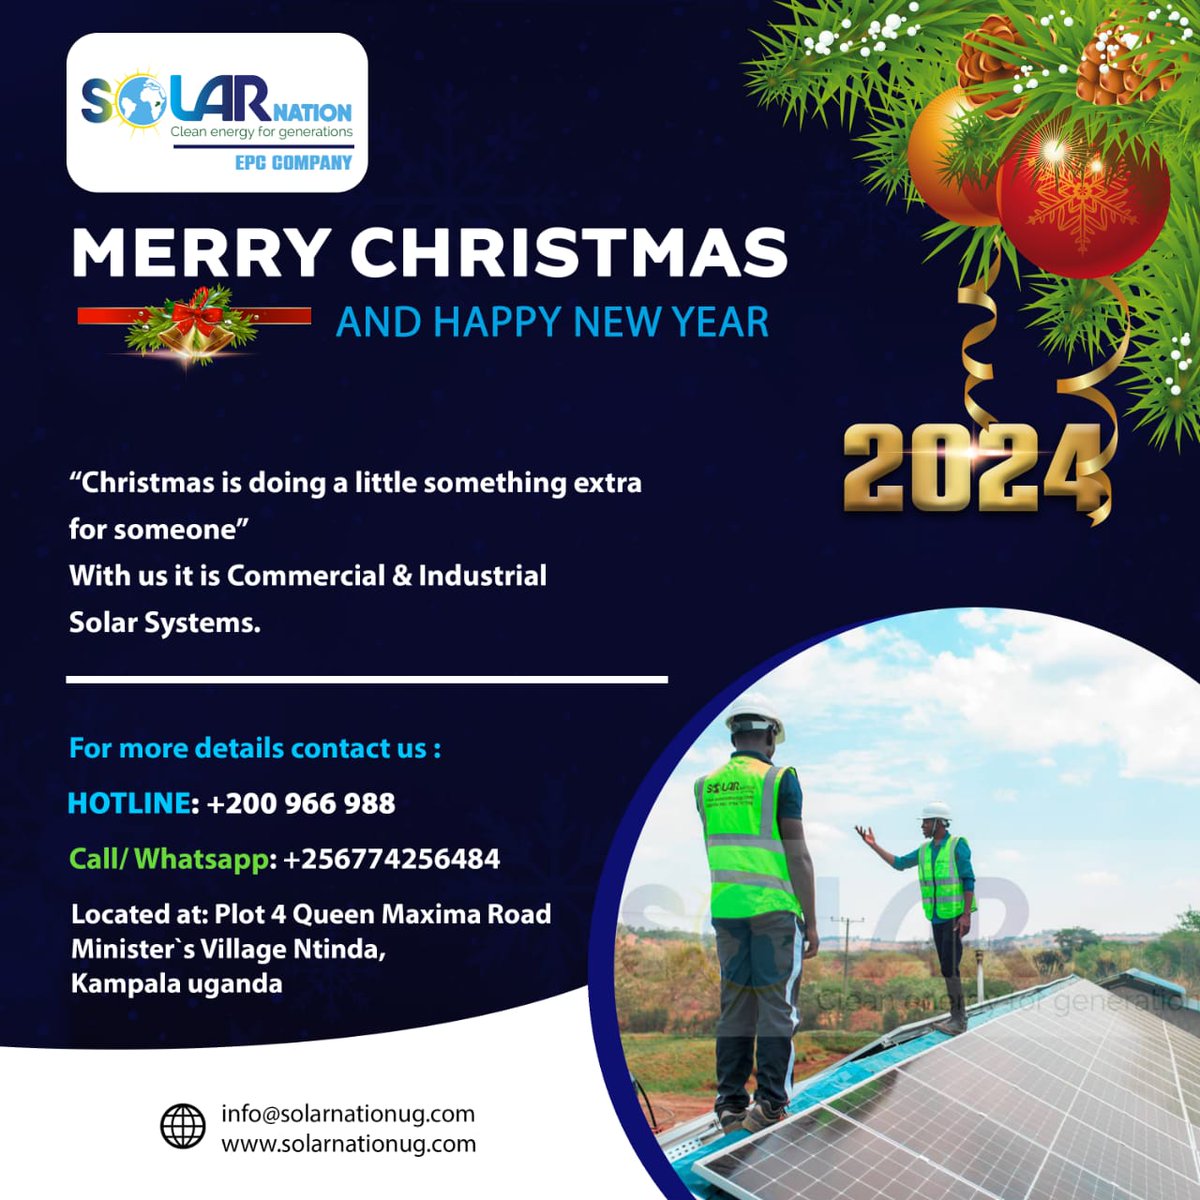 The future is bright with installation done ✔ with the right team. At Solar Nation we got you covered Merry Christmas and happy new year 🎉